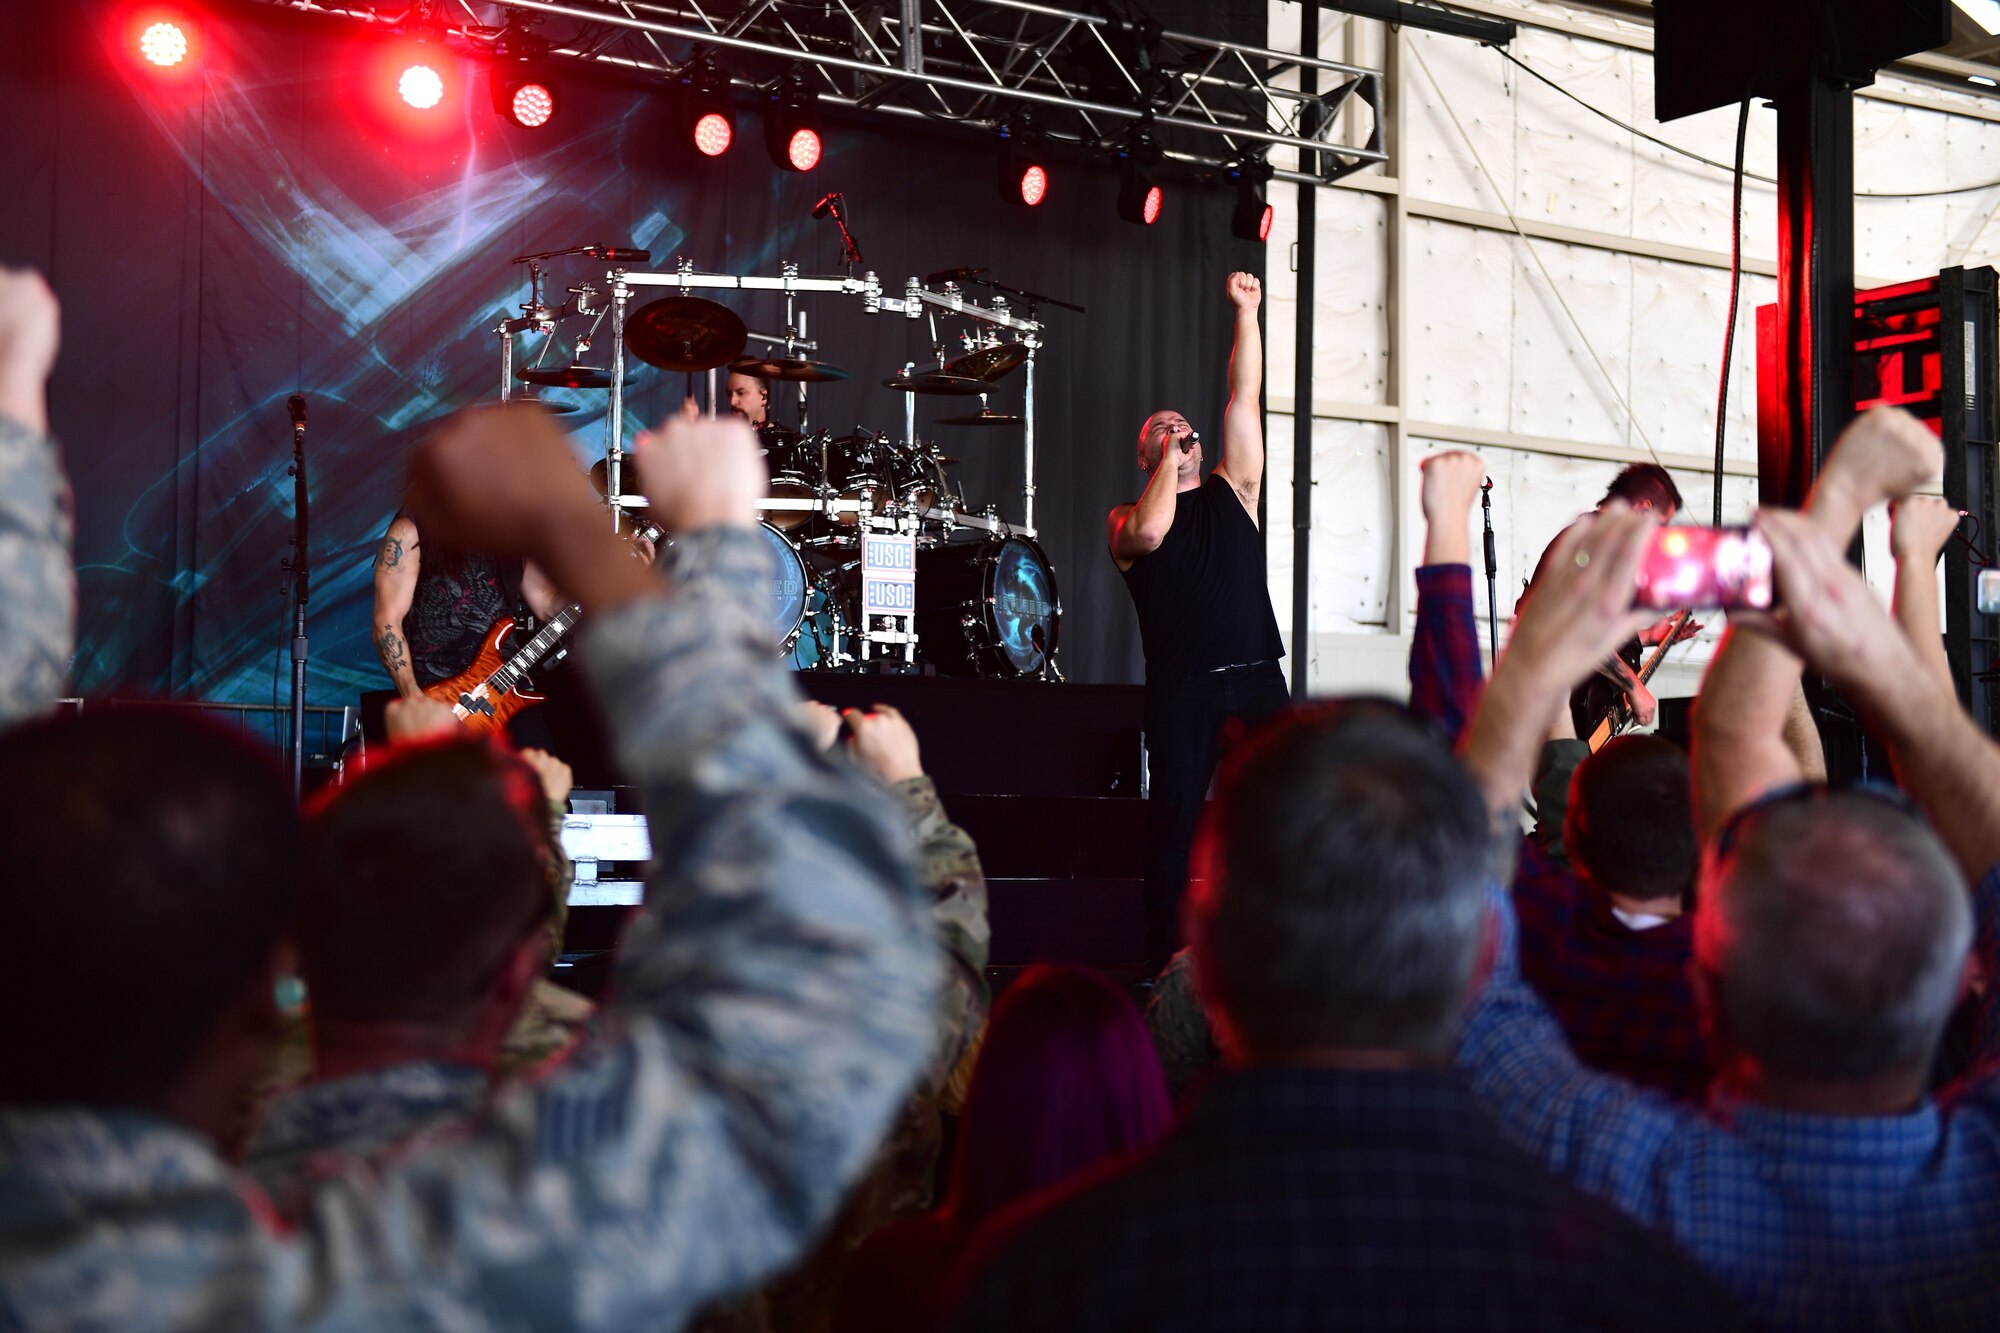 Disturbed performs for Creech Air Force Base Airmen Oct. 23, 2018. Disturbed came to Creech via the USO and performed a concert for Creech Airmen after learning about the wing mission. (U.S. Air Force photo by Senior Airman Christian Clausen)